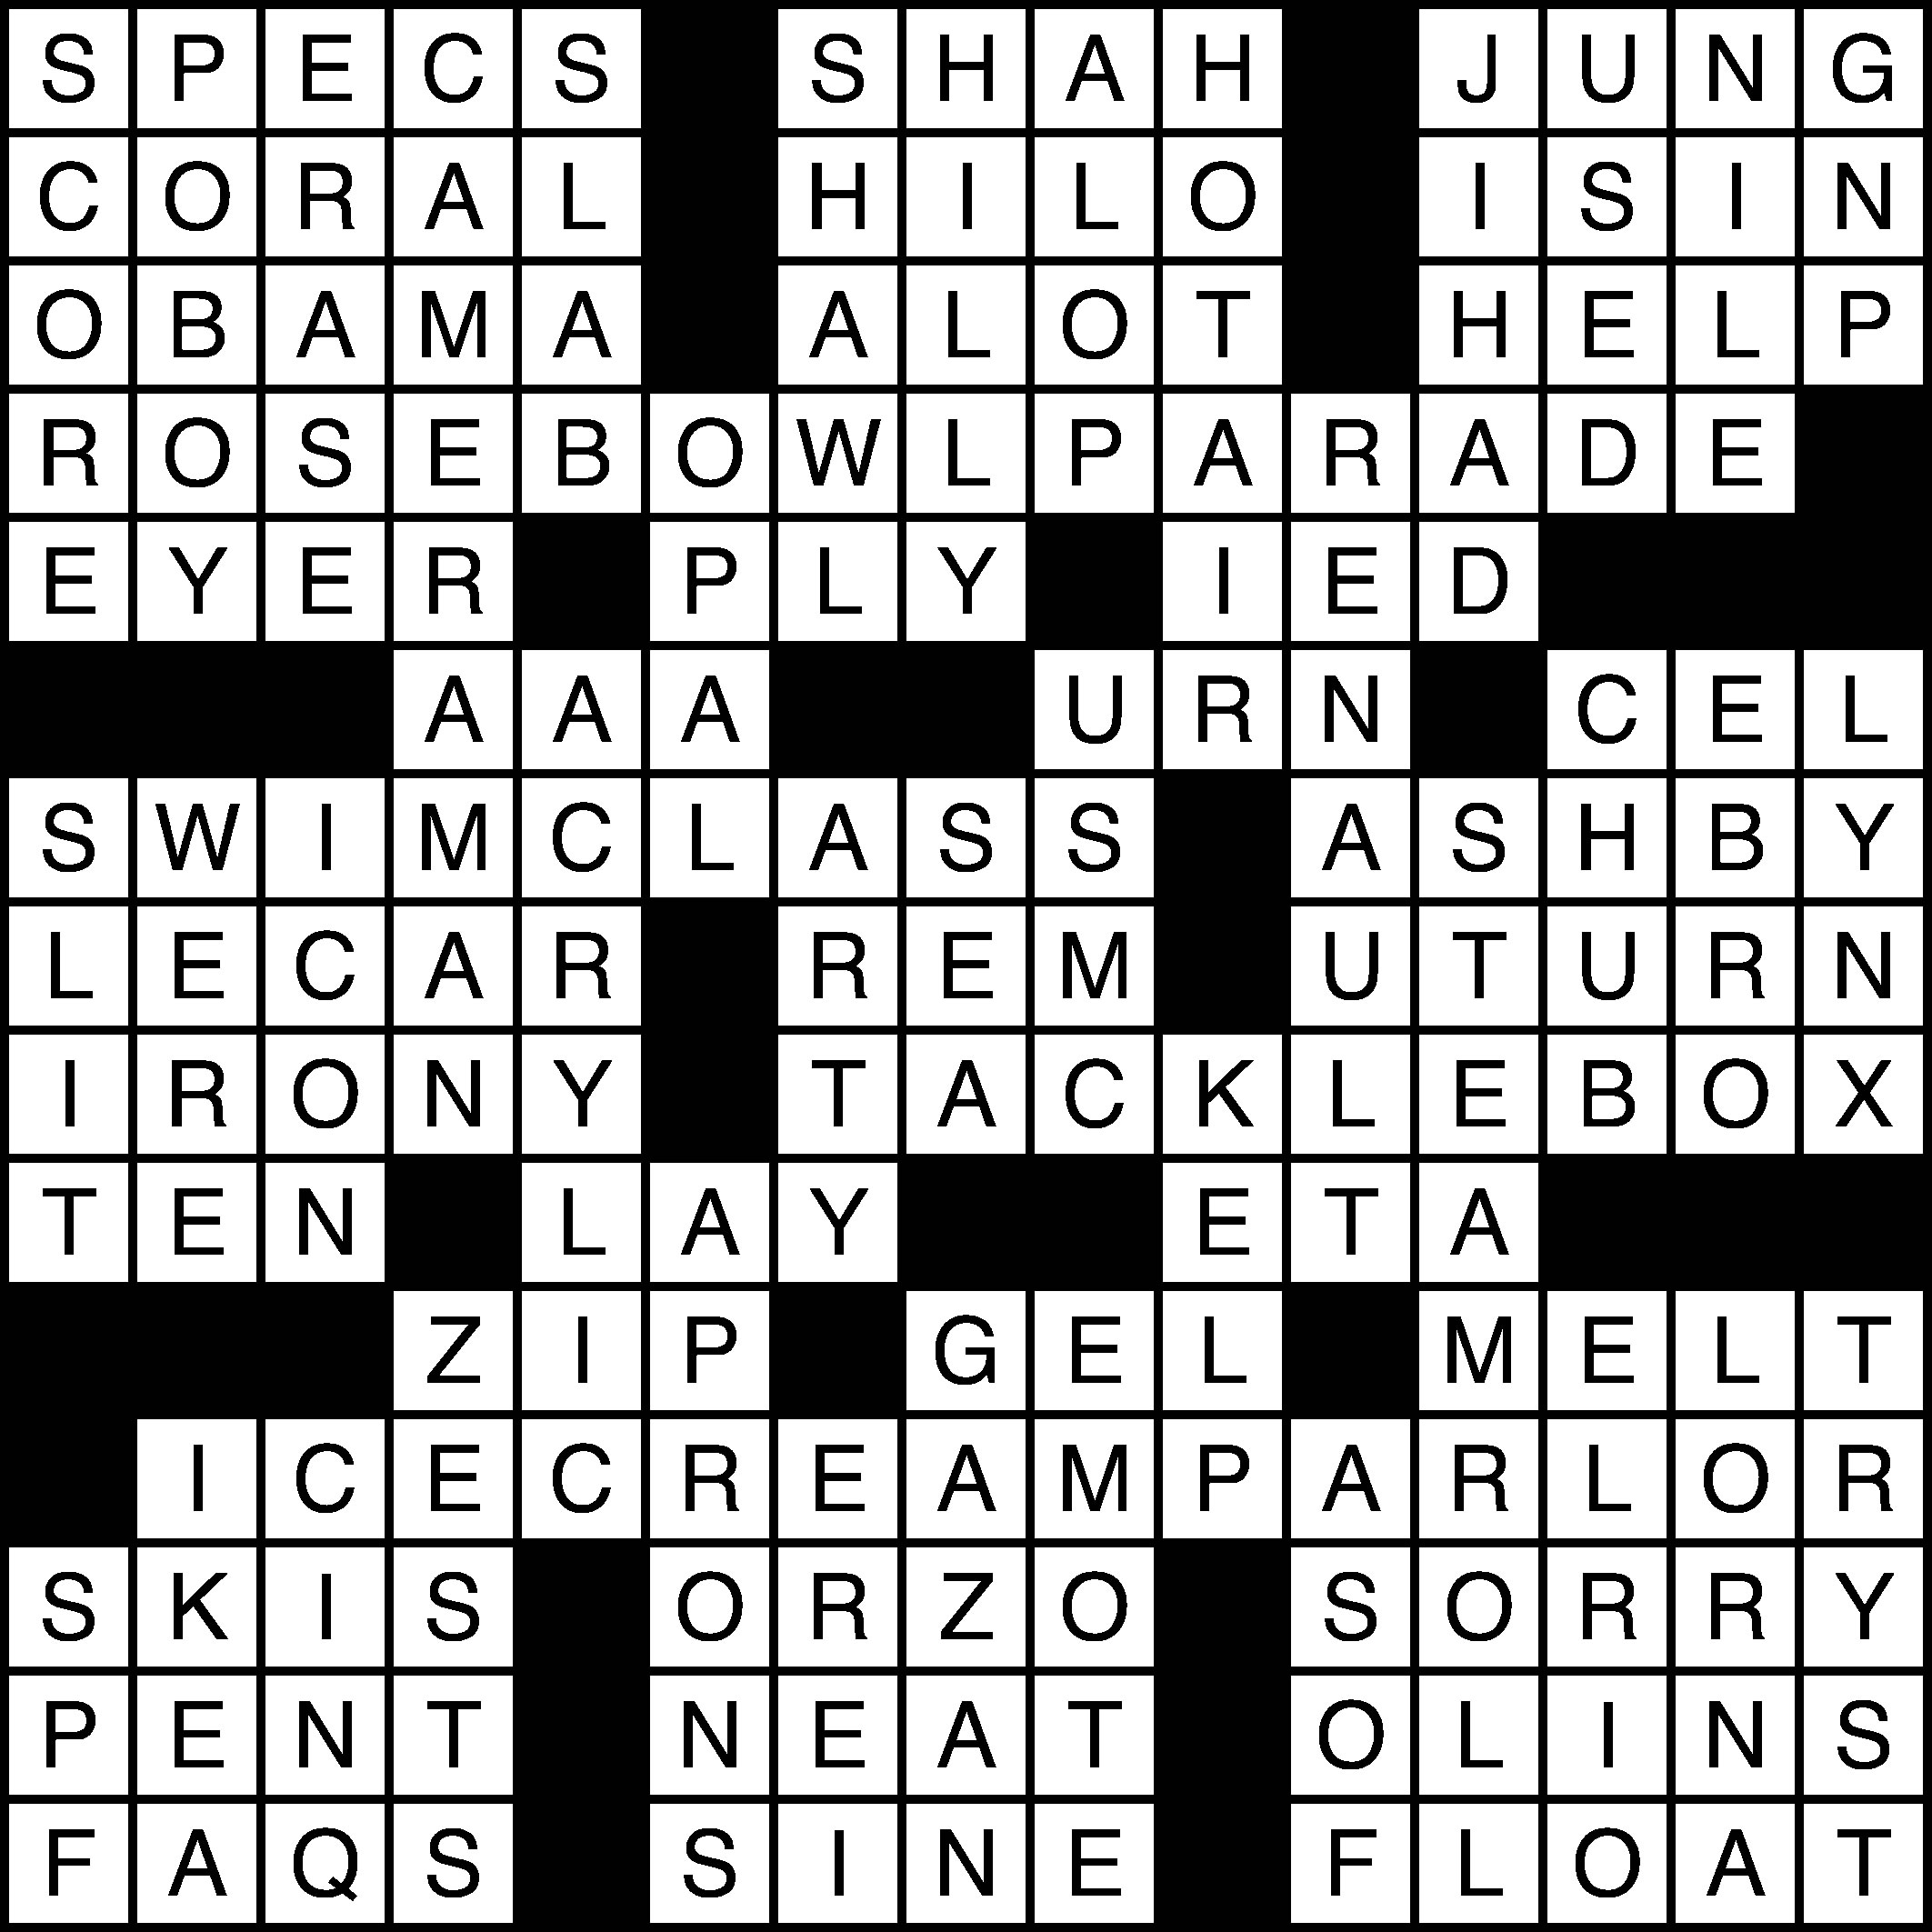 Crossword Solutions: 03/28/13 The Baylor Lariat